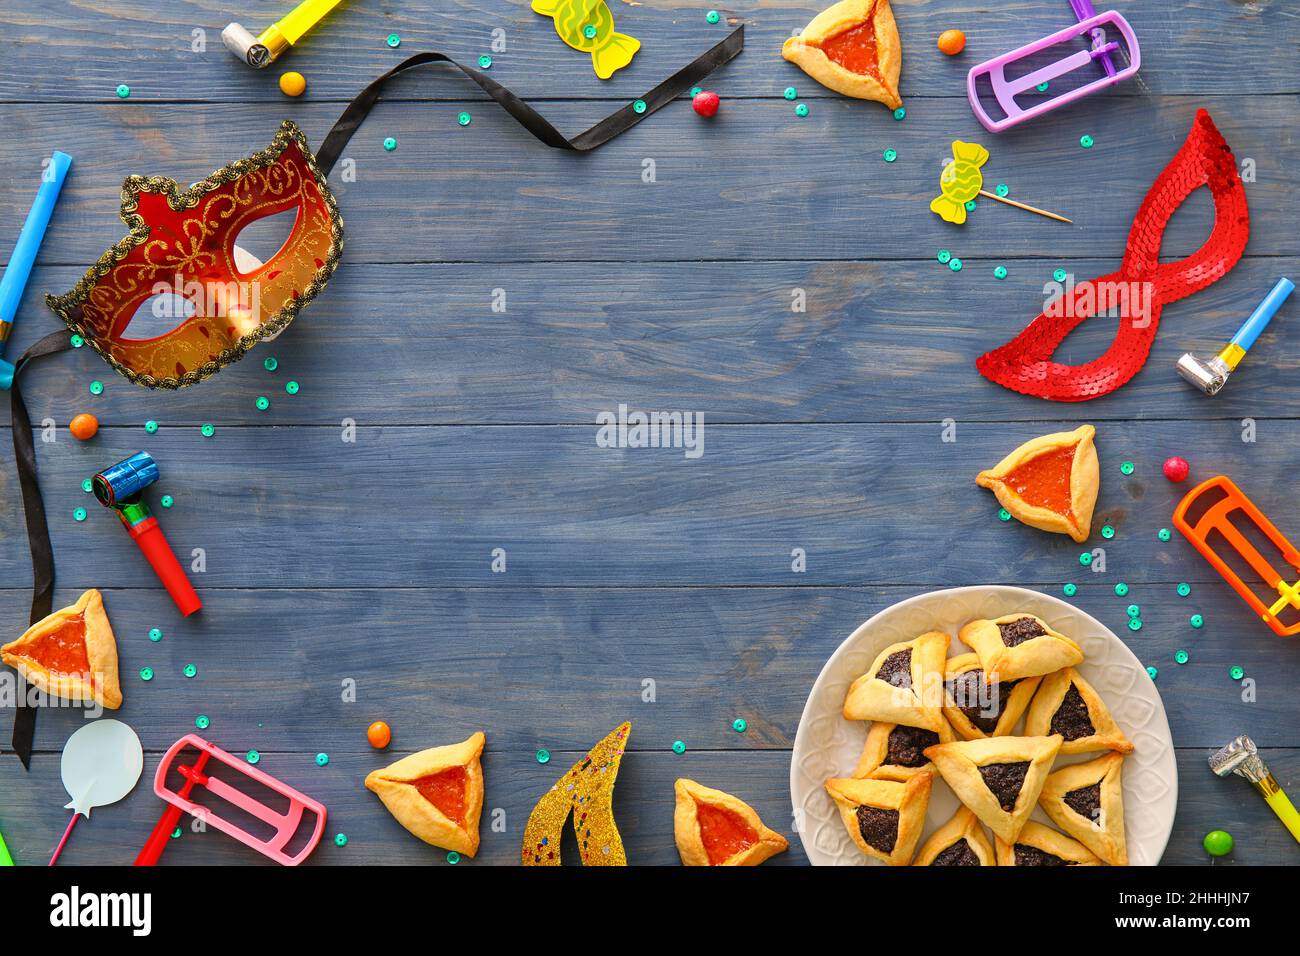 Frame made of party decor and Hamantaschen cookies with rattles for Purim holiday on color wooden background Stock Photo